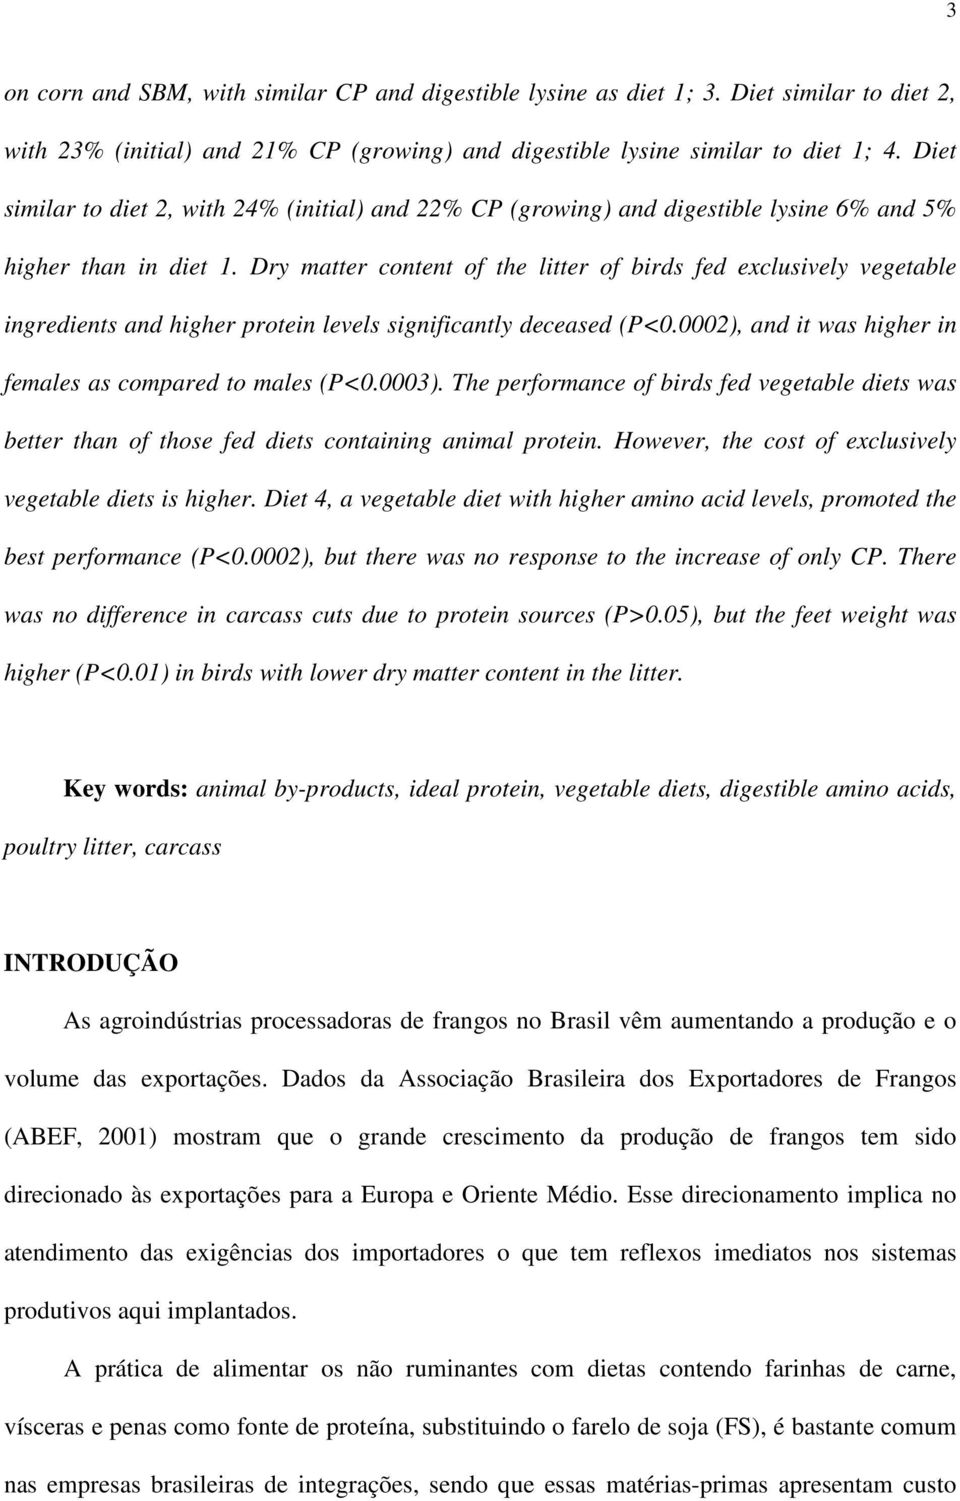 Dry matter content of the litter of birds fed exclusively vegetable ingredients and higher protein levels significantly deceased (P<0.0002), and it was higher in females as compared to males (P<0.